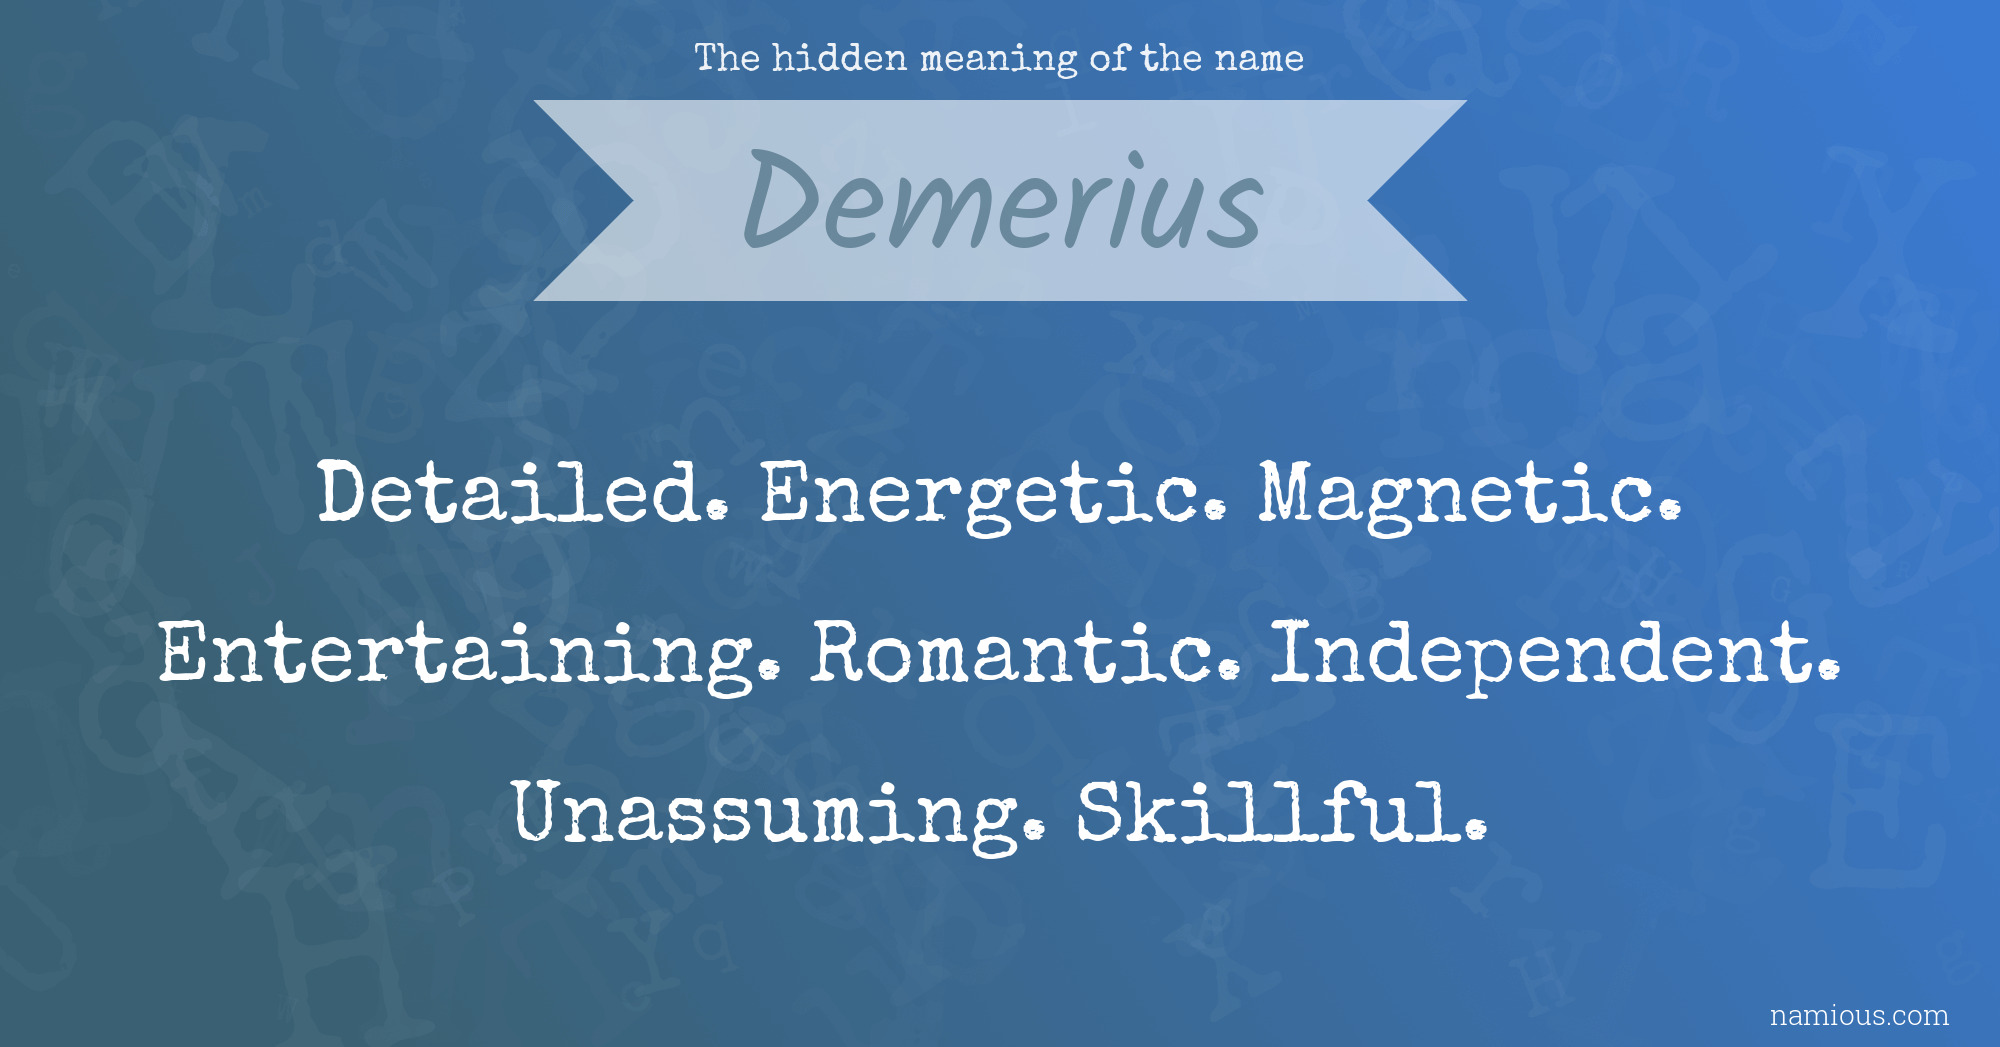 The hidden meaning of the name Demerius